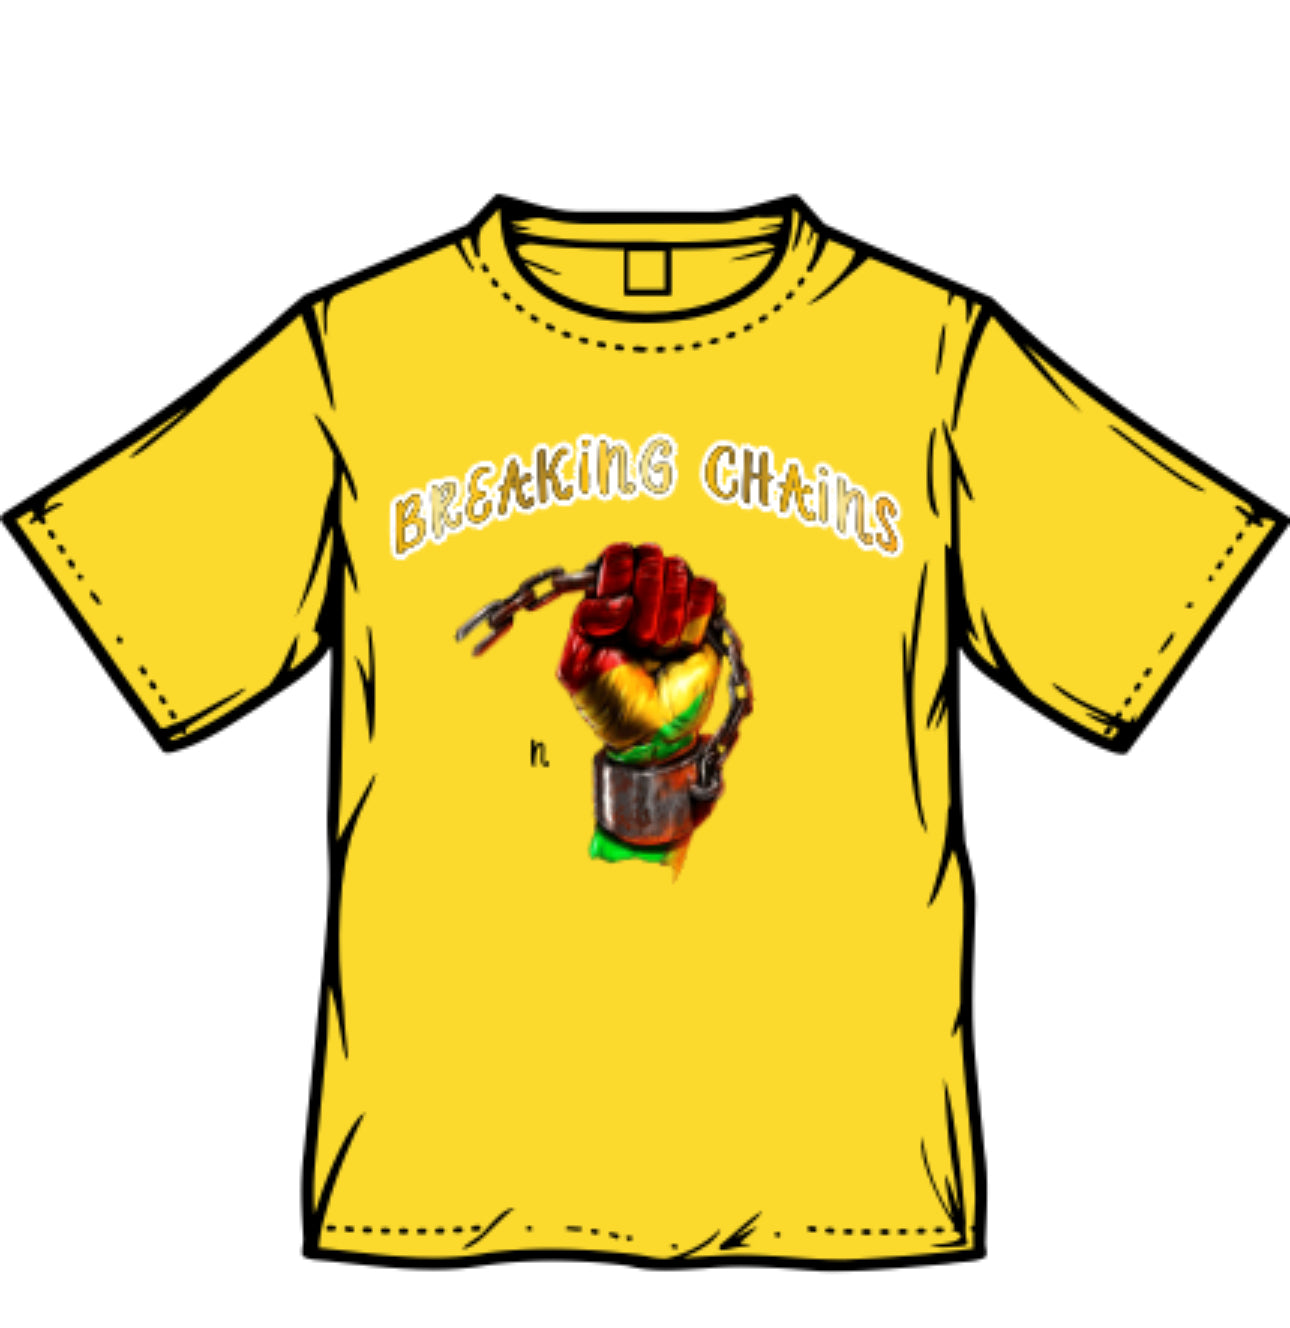 Limited Edition “BREAKING CHAINS” Juneteenth Shirts